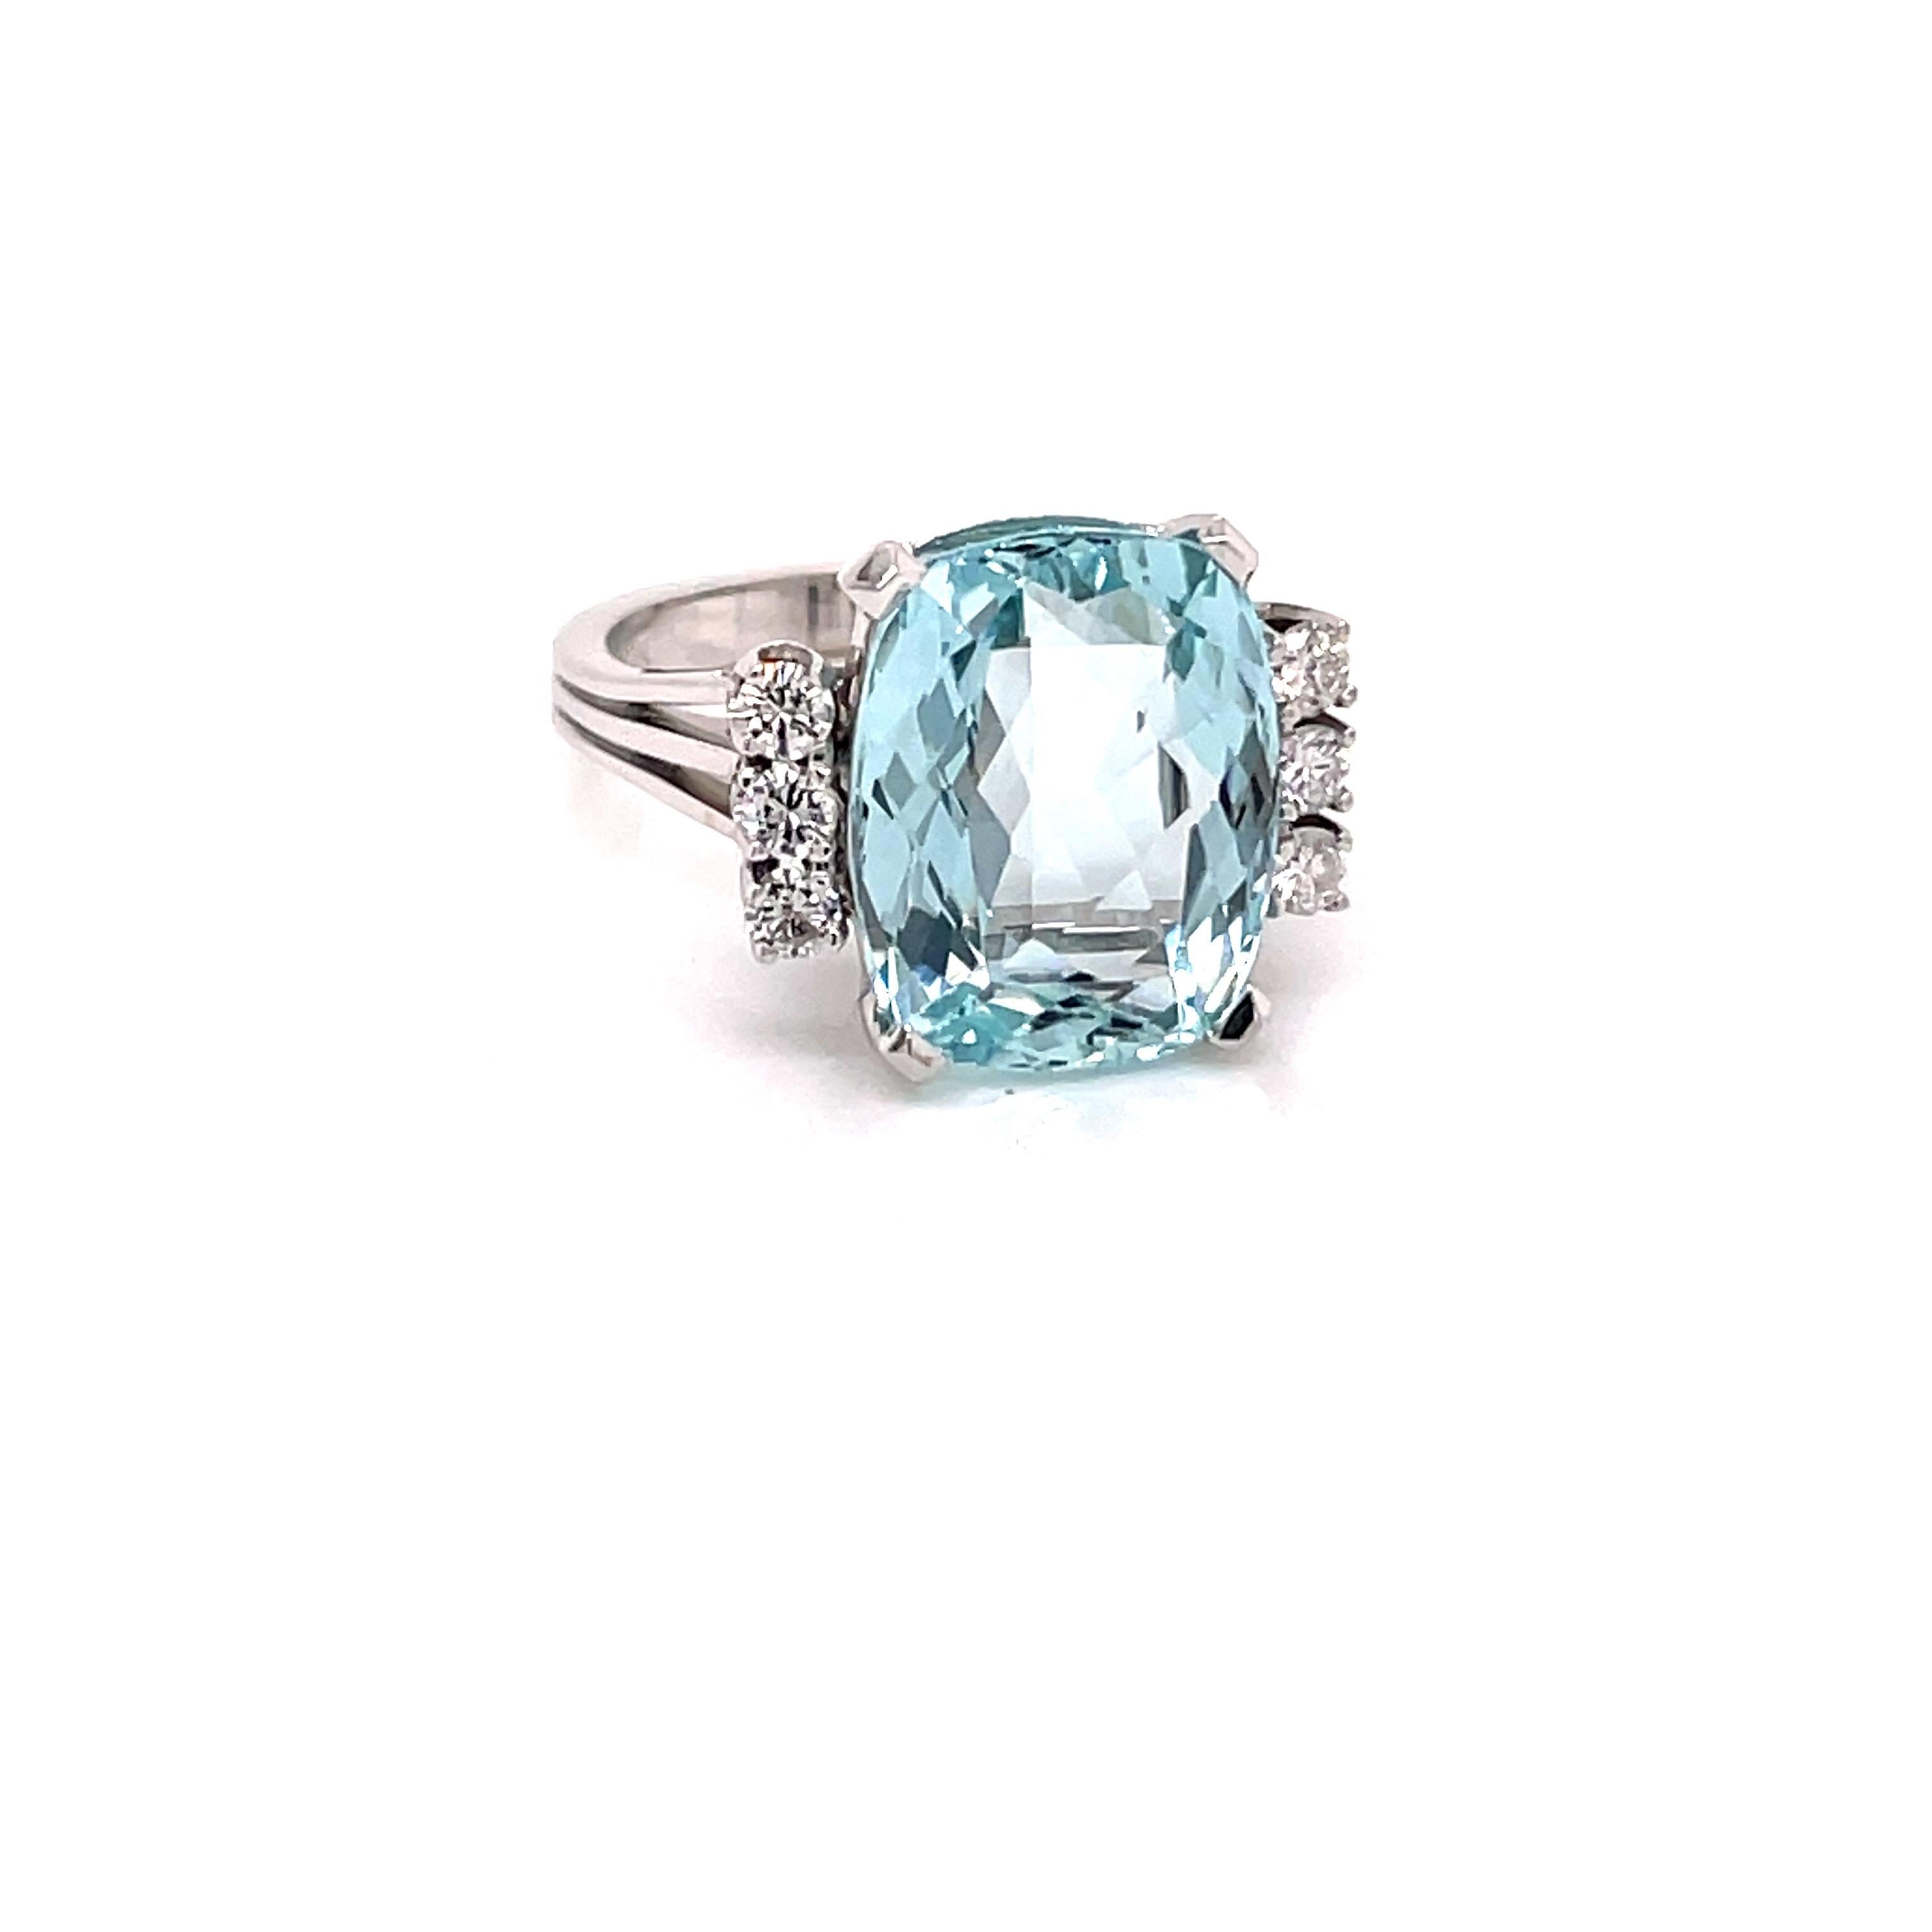 Vintage 1960's 7.35ct Cushion Cut Aquamarine ring with Diamonds - The aquamarine weighs approximately 7.35ct and measures 13.7 x 11mm.  It is accented with 6 round brilliant diamonds weighing approximately .36ct G -H color SI clarity.  The setting